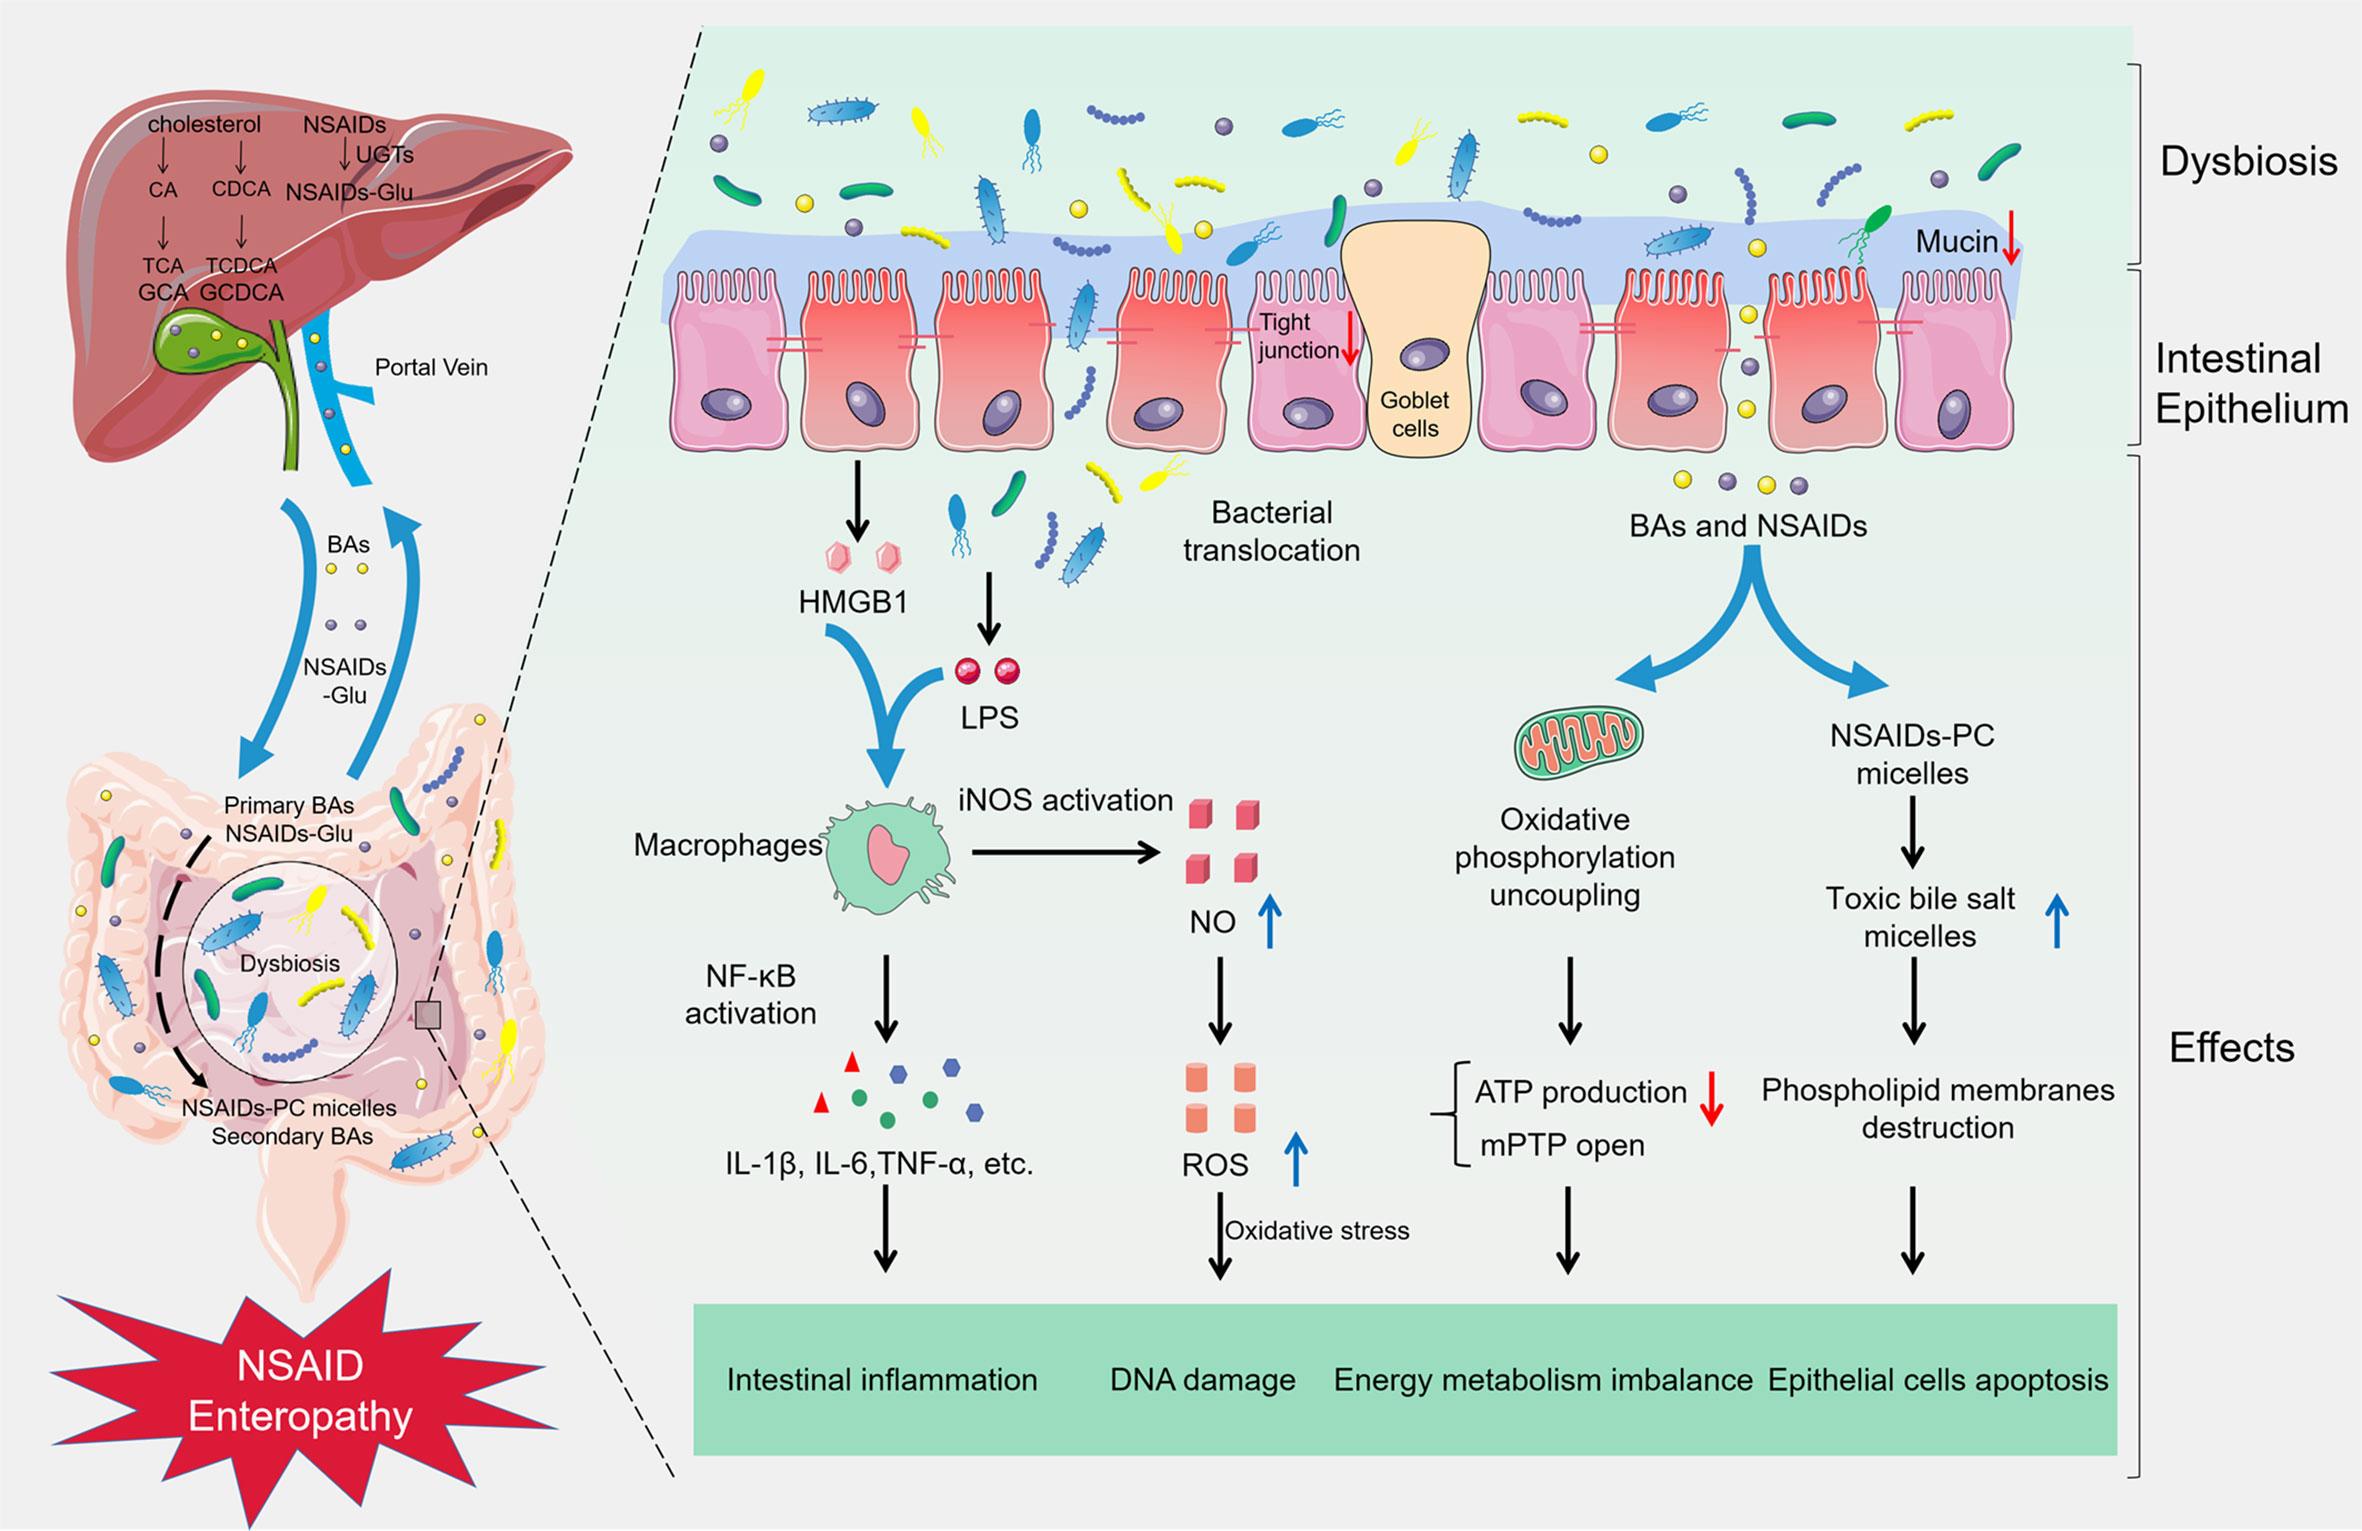 A schematic diagram showing the detrimental effects of NSAIDs on the intestinal epithelium.